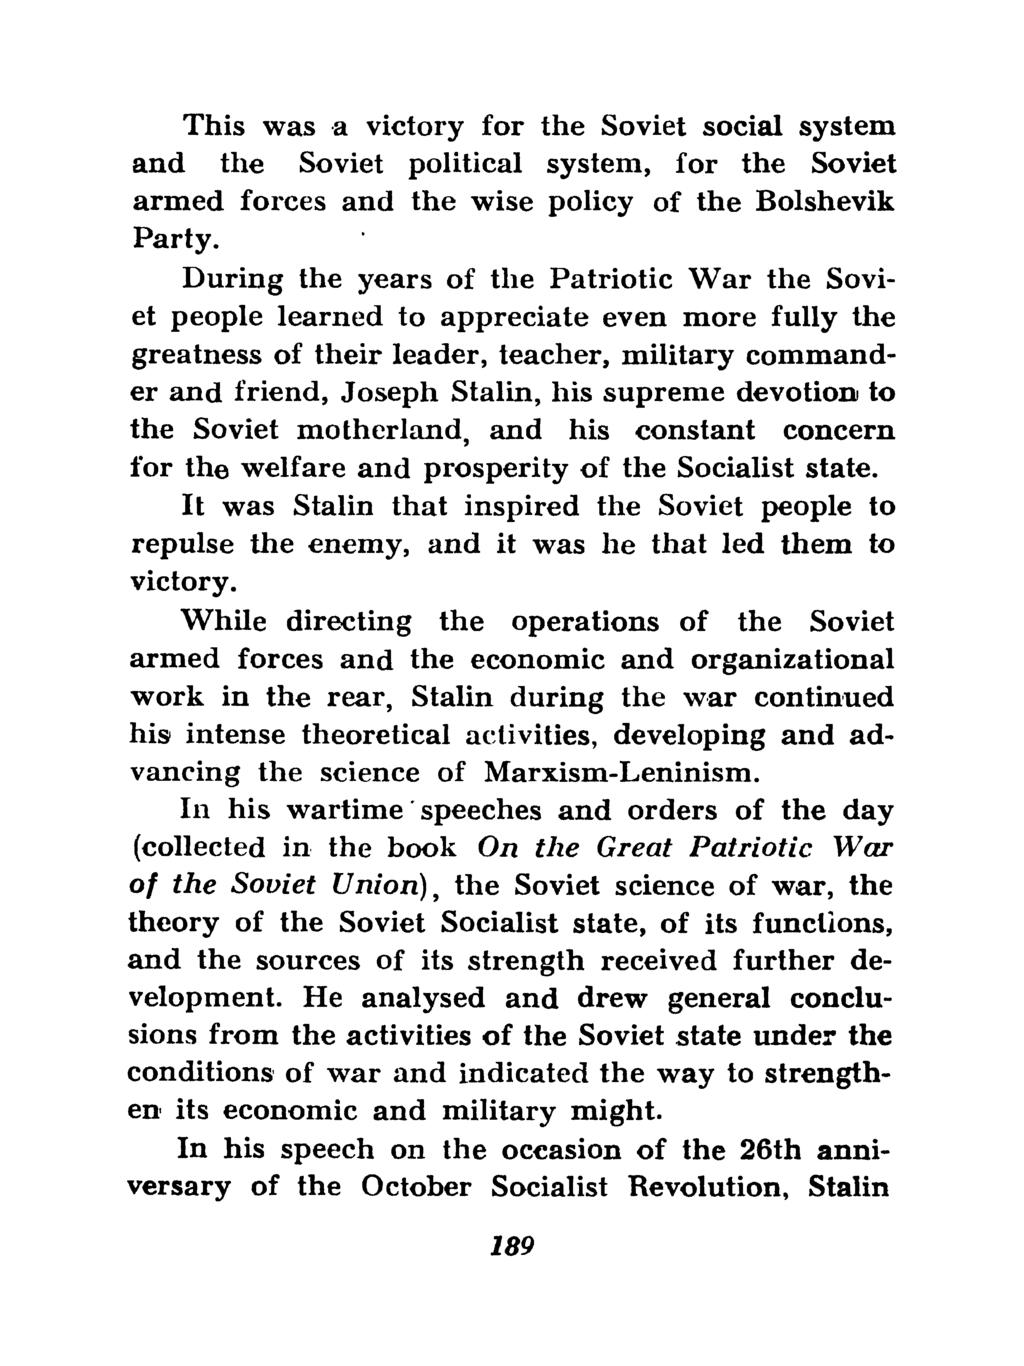 This was a victory for the Soviet social system and the Soviet political system, for the Soviet armed forces and the wise policy of the Bolshevik Party.